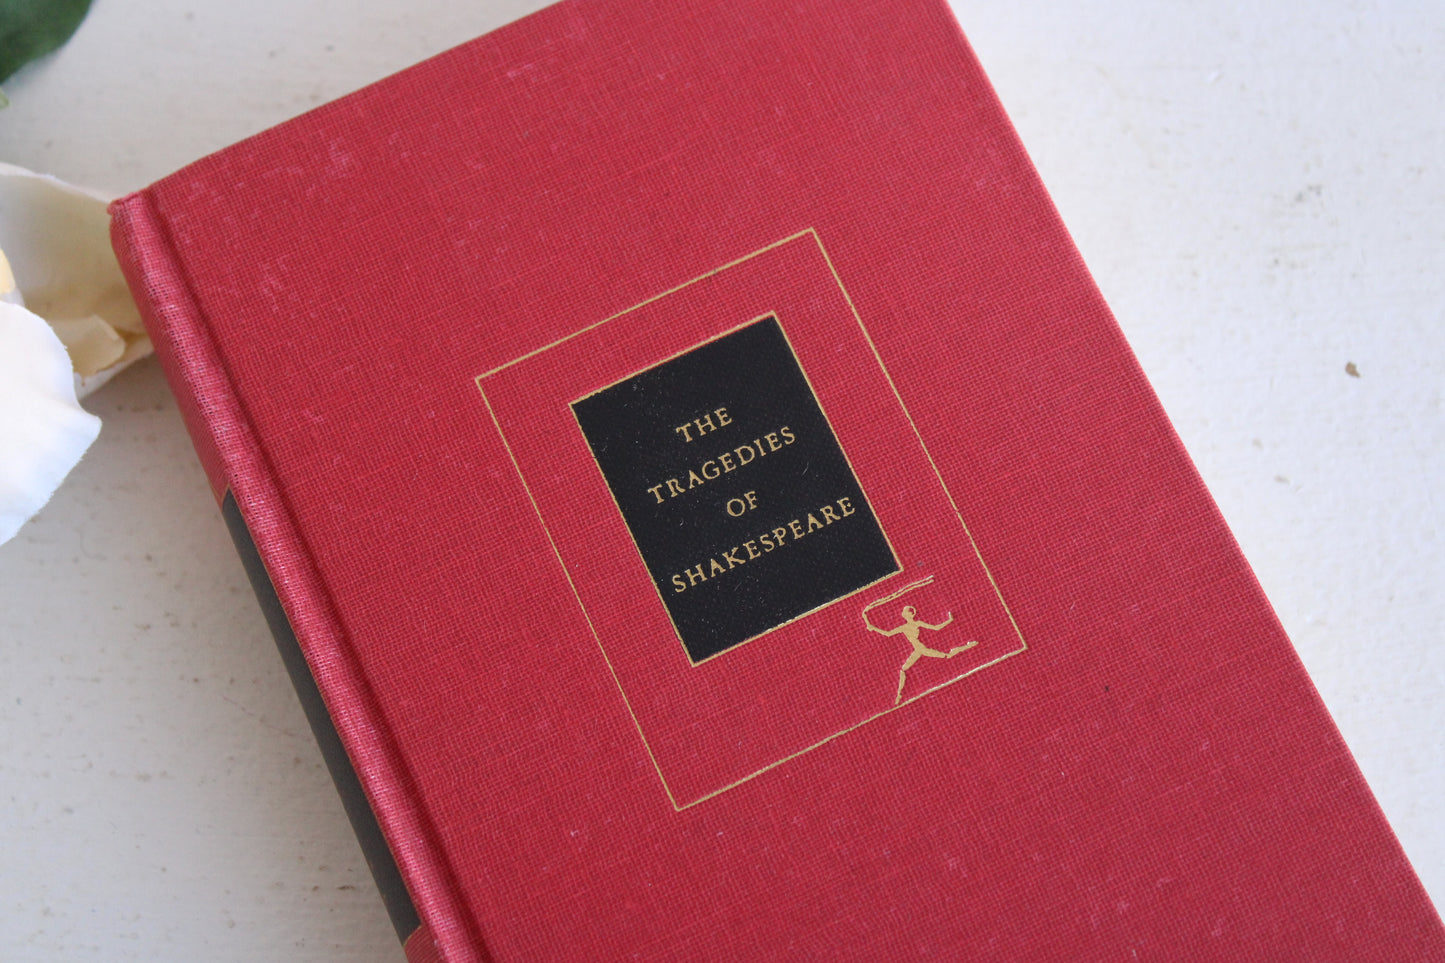 Vintage Book, The Tragedies of Shakespeare, 1950s